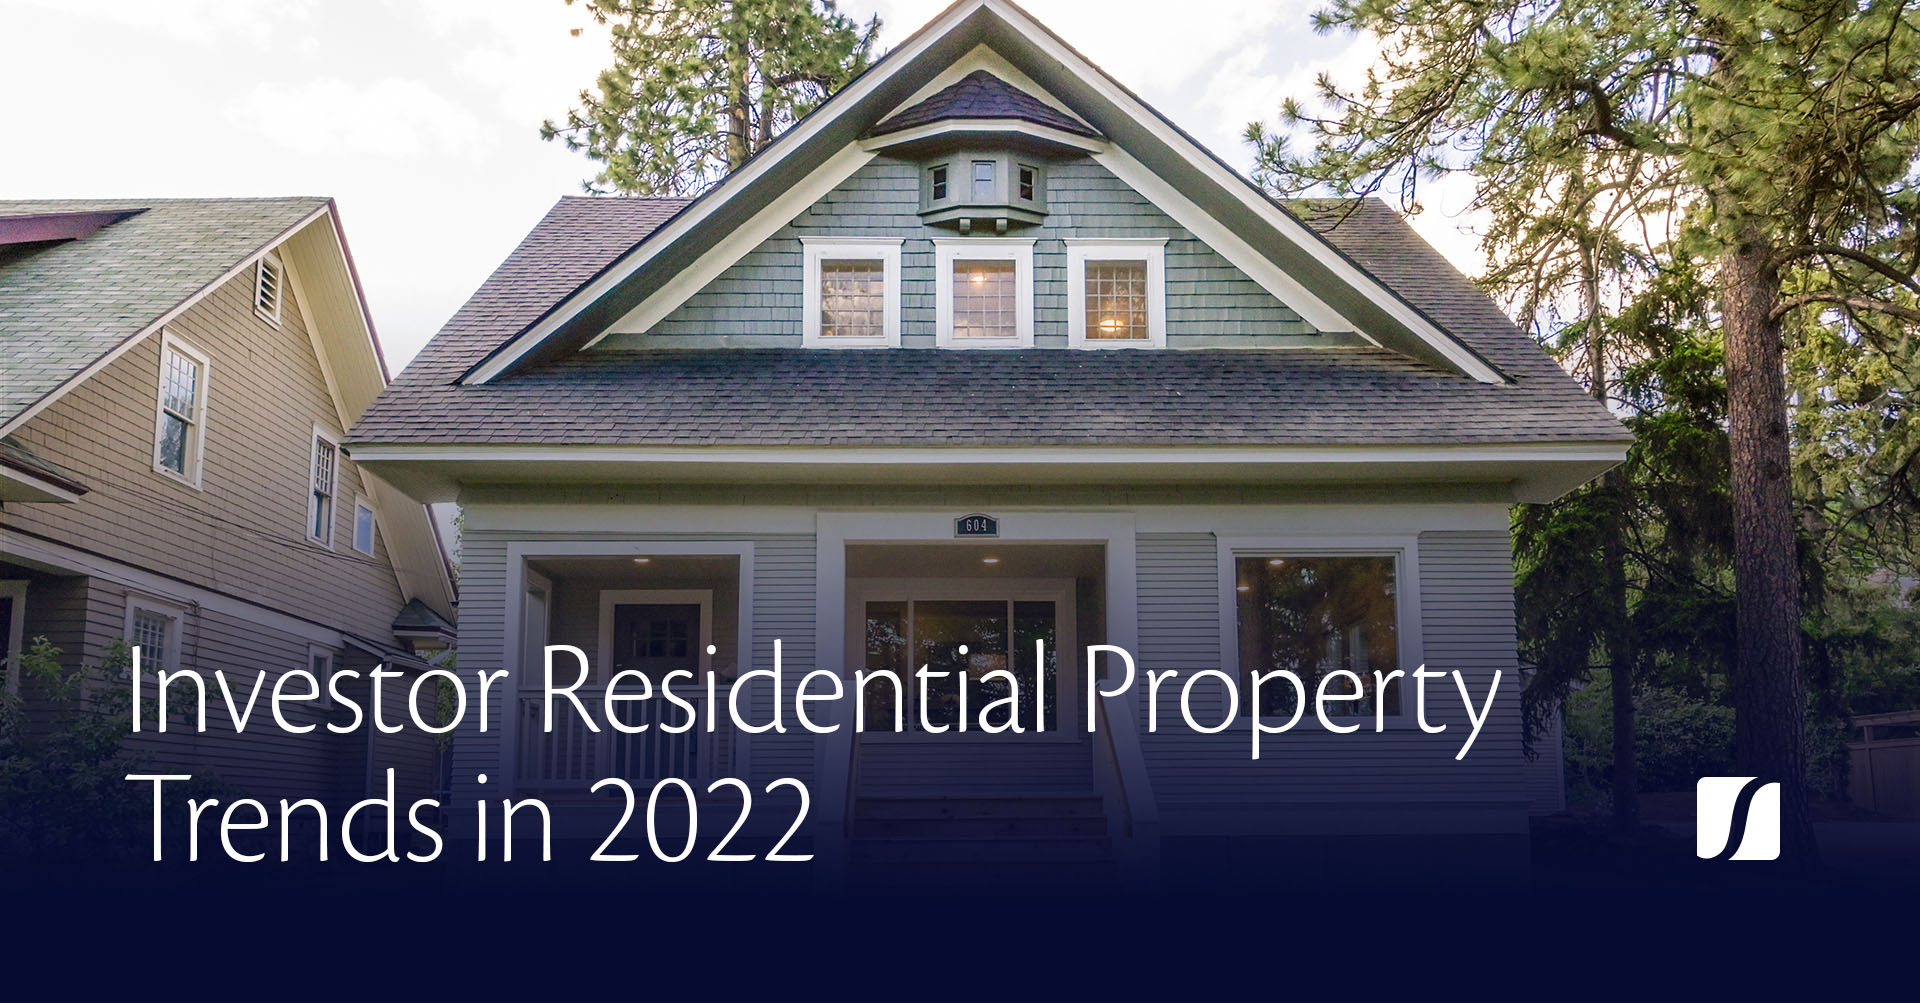 Investor Residential Property Trends for 2022